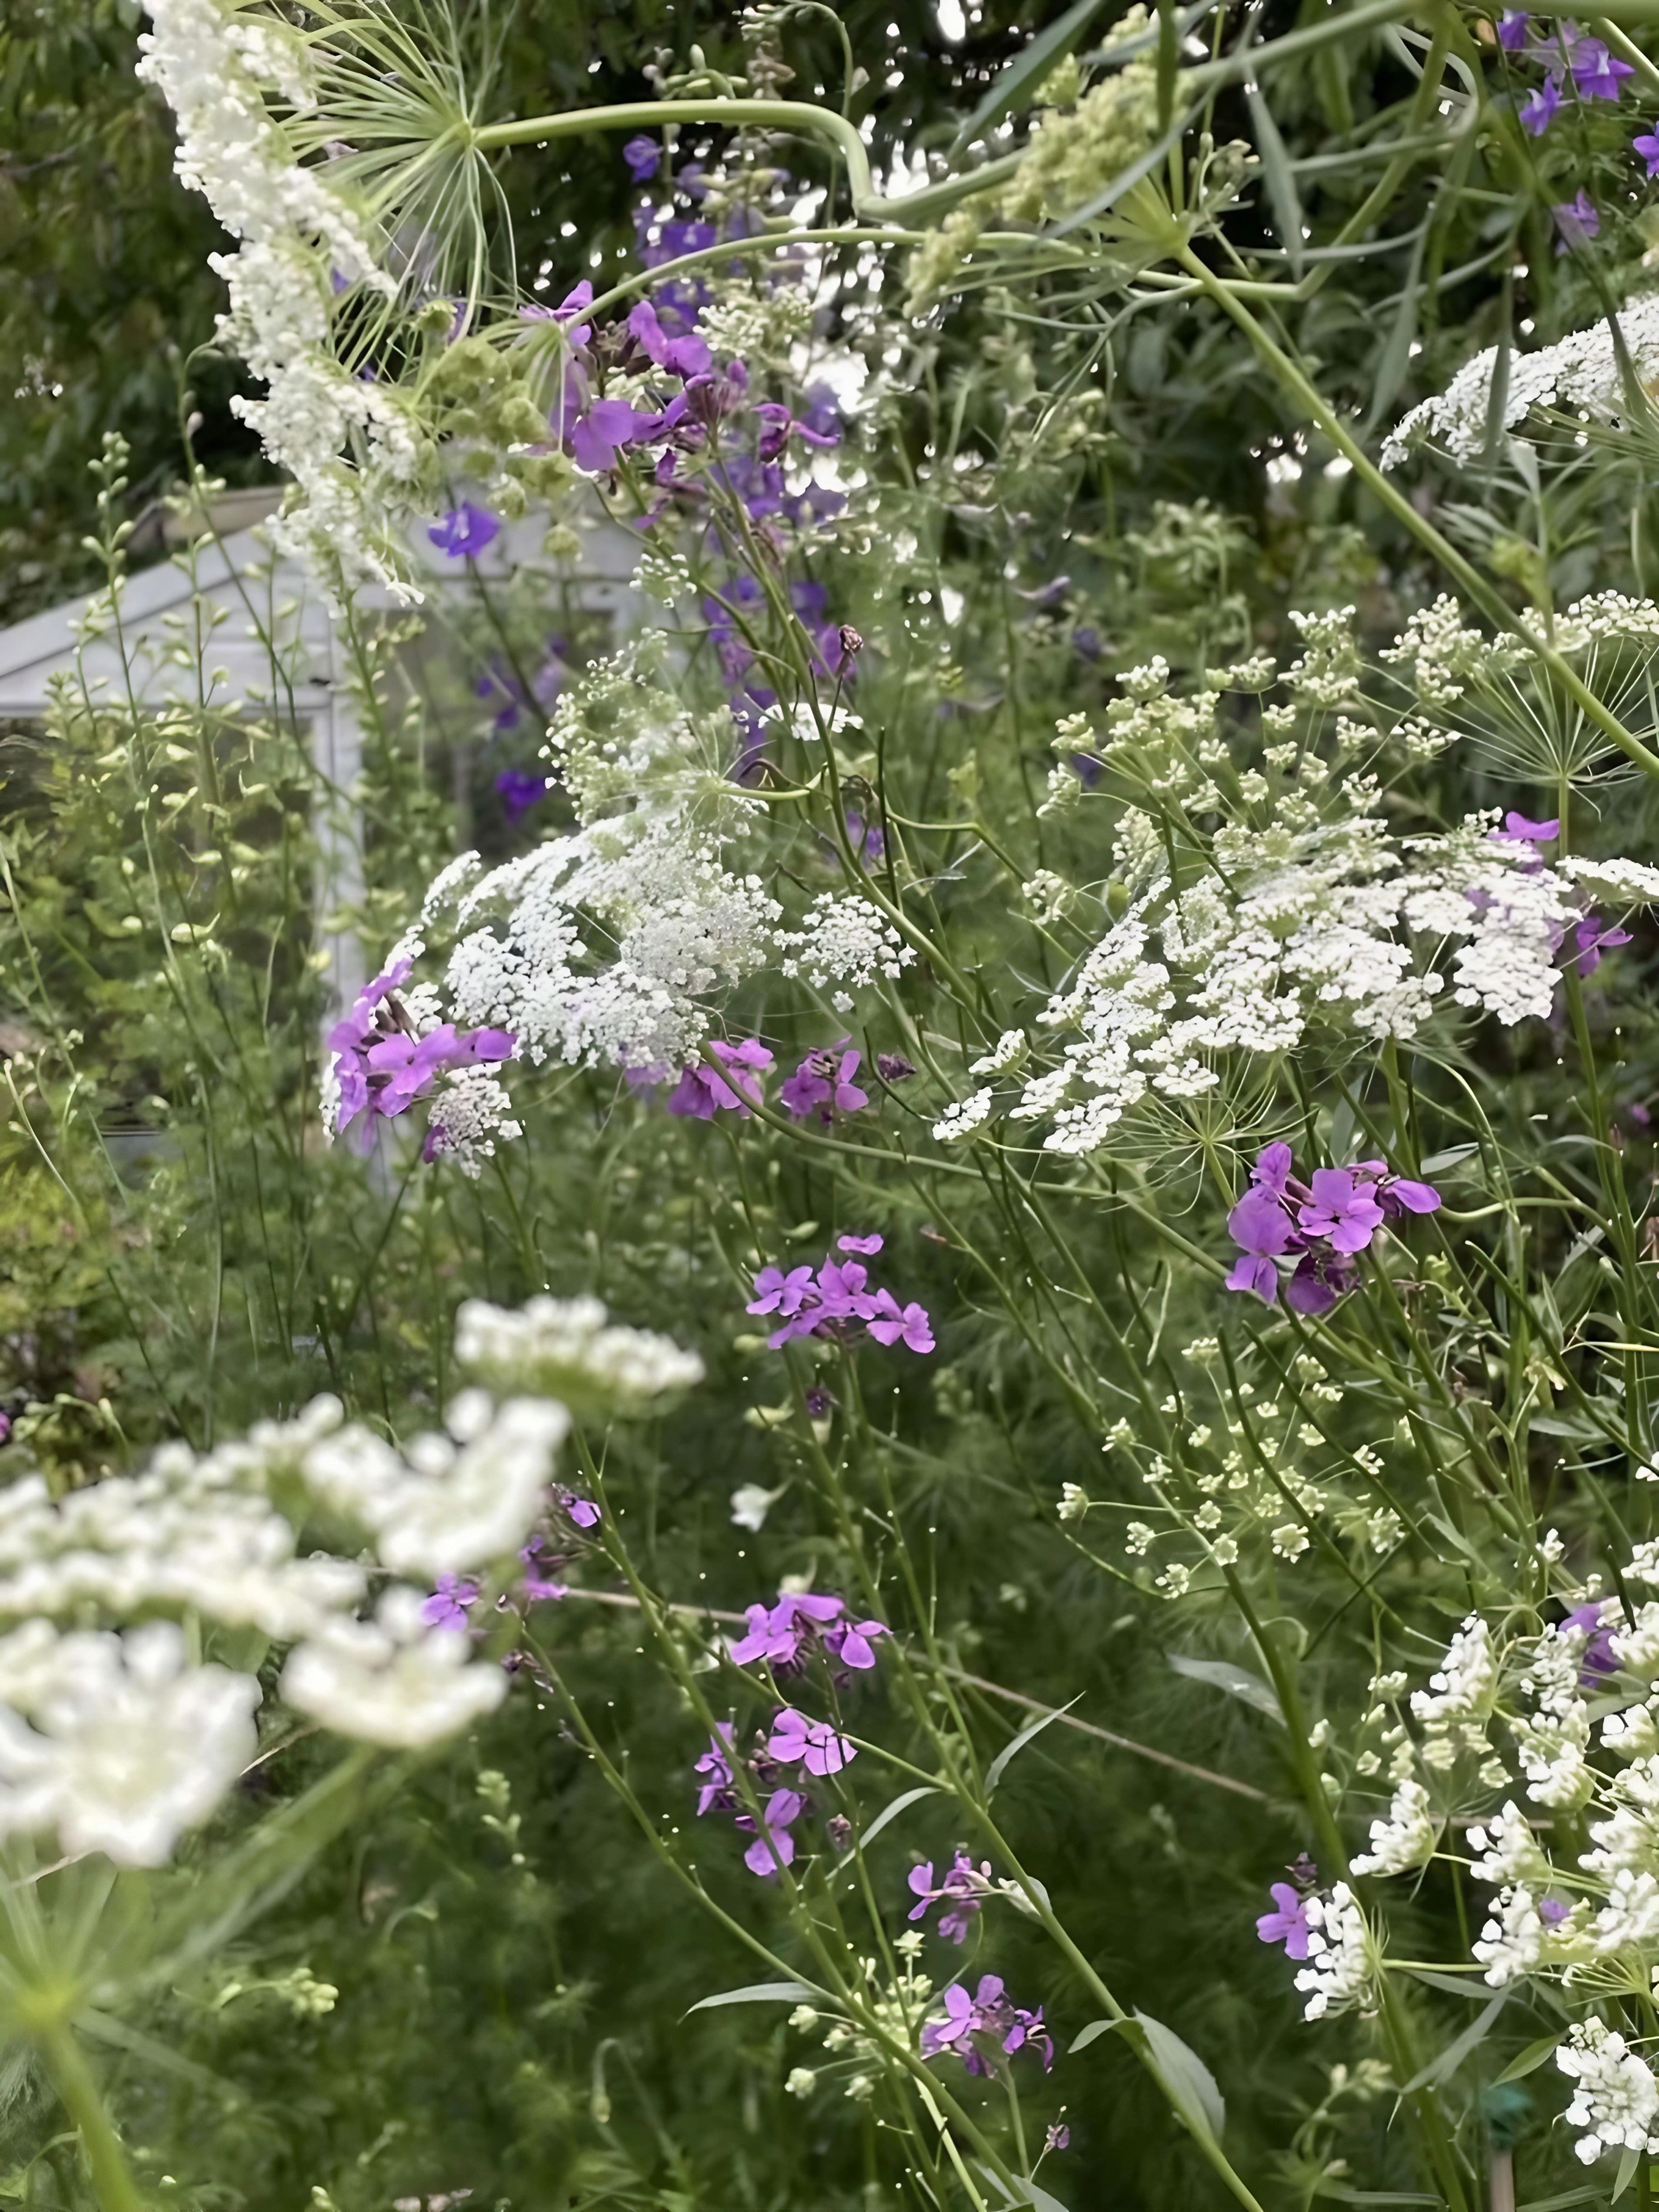 Ammi Majus flowers in a diverse floral garden setting